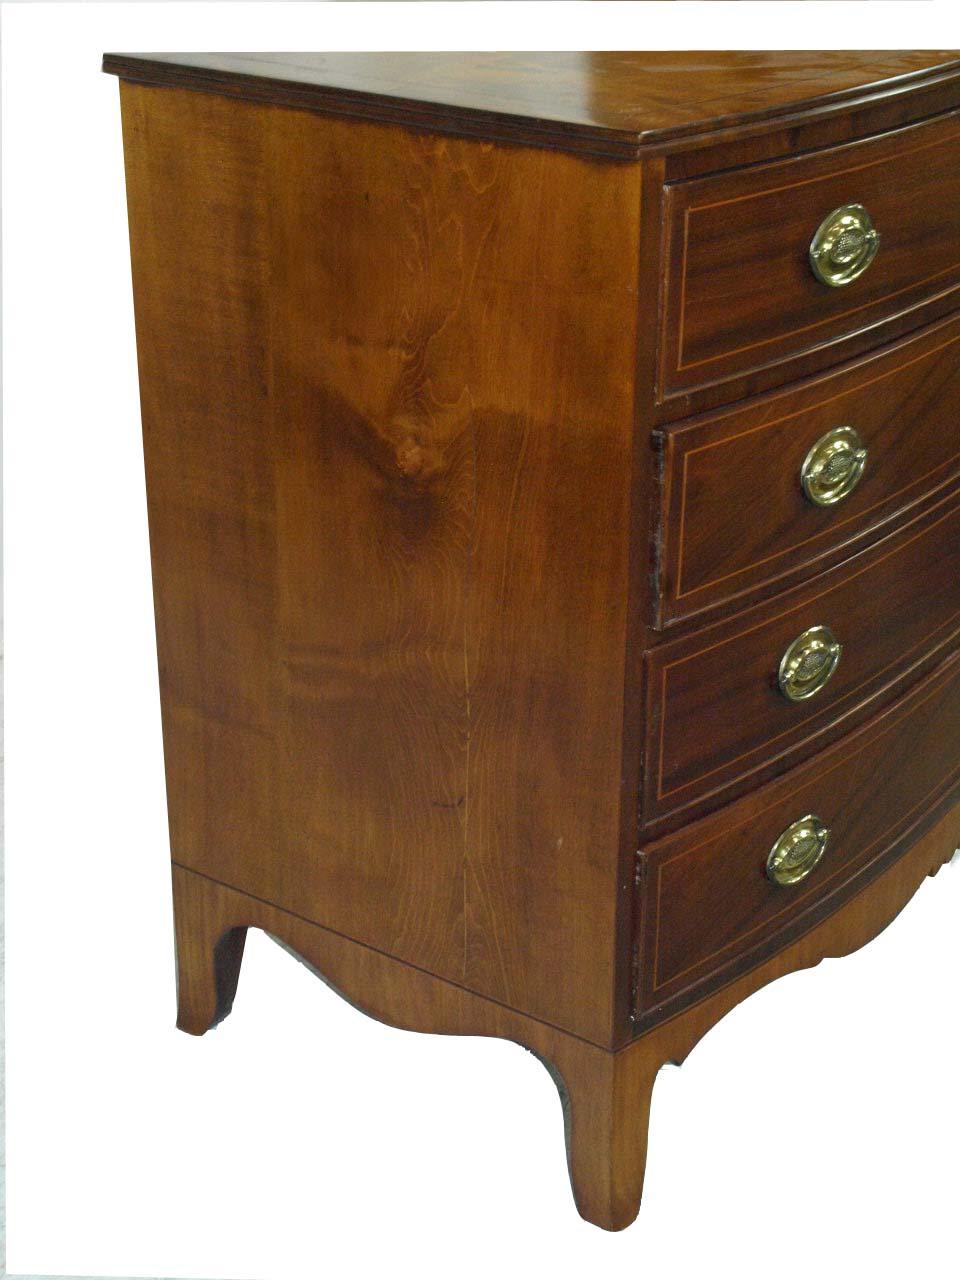 New England Hepplewhite inlaid mahogany and maple bow front chest, the top, sides and feet are maple and the drawers are mahogany; the top inlaid with a band of boxwood and mahogany; drawers retaining their original brass oval pulls are inlaid with